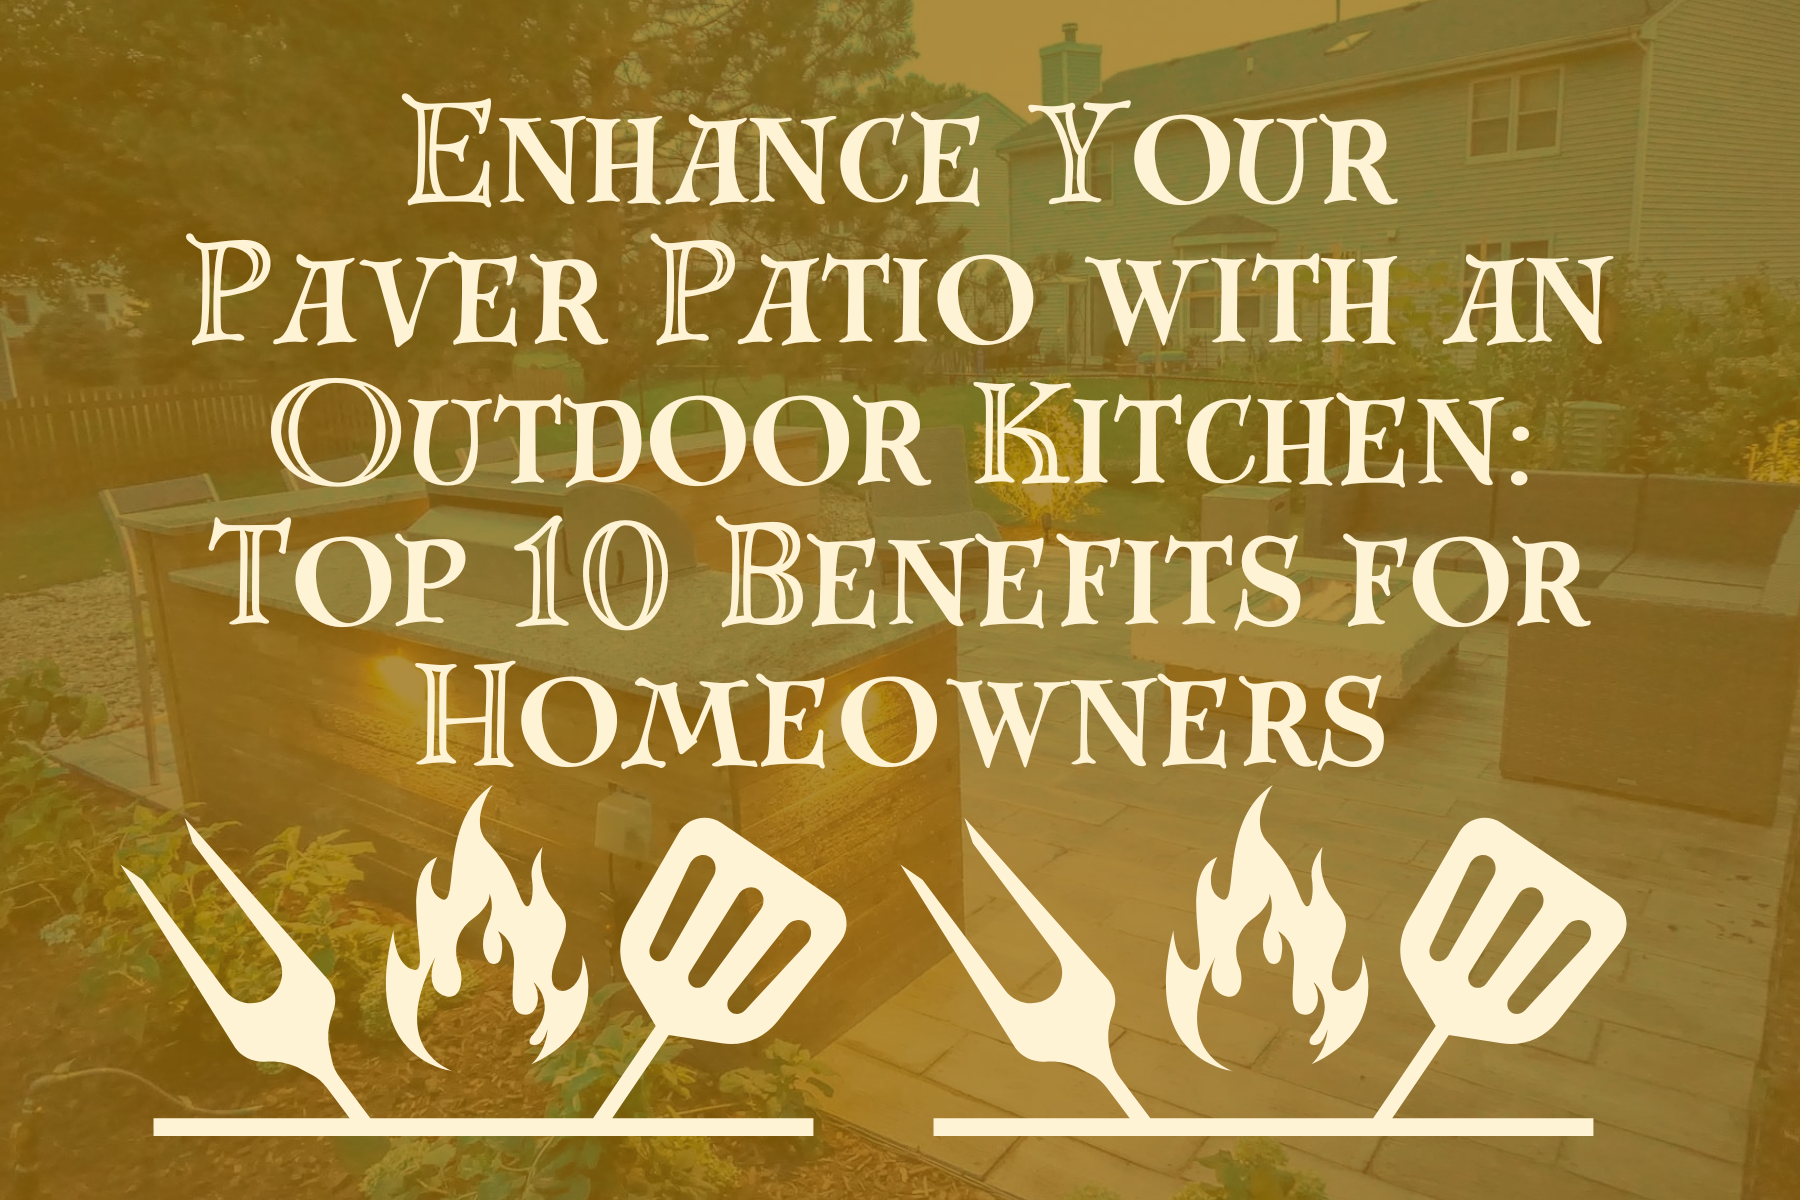 Enhance Your Paver Patio with an Outdoor Kitchen: Top 10 Benefits for Homeowners